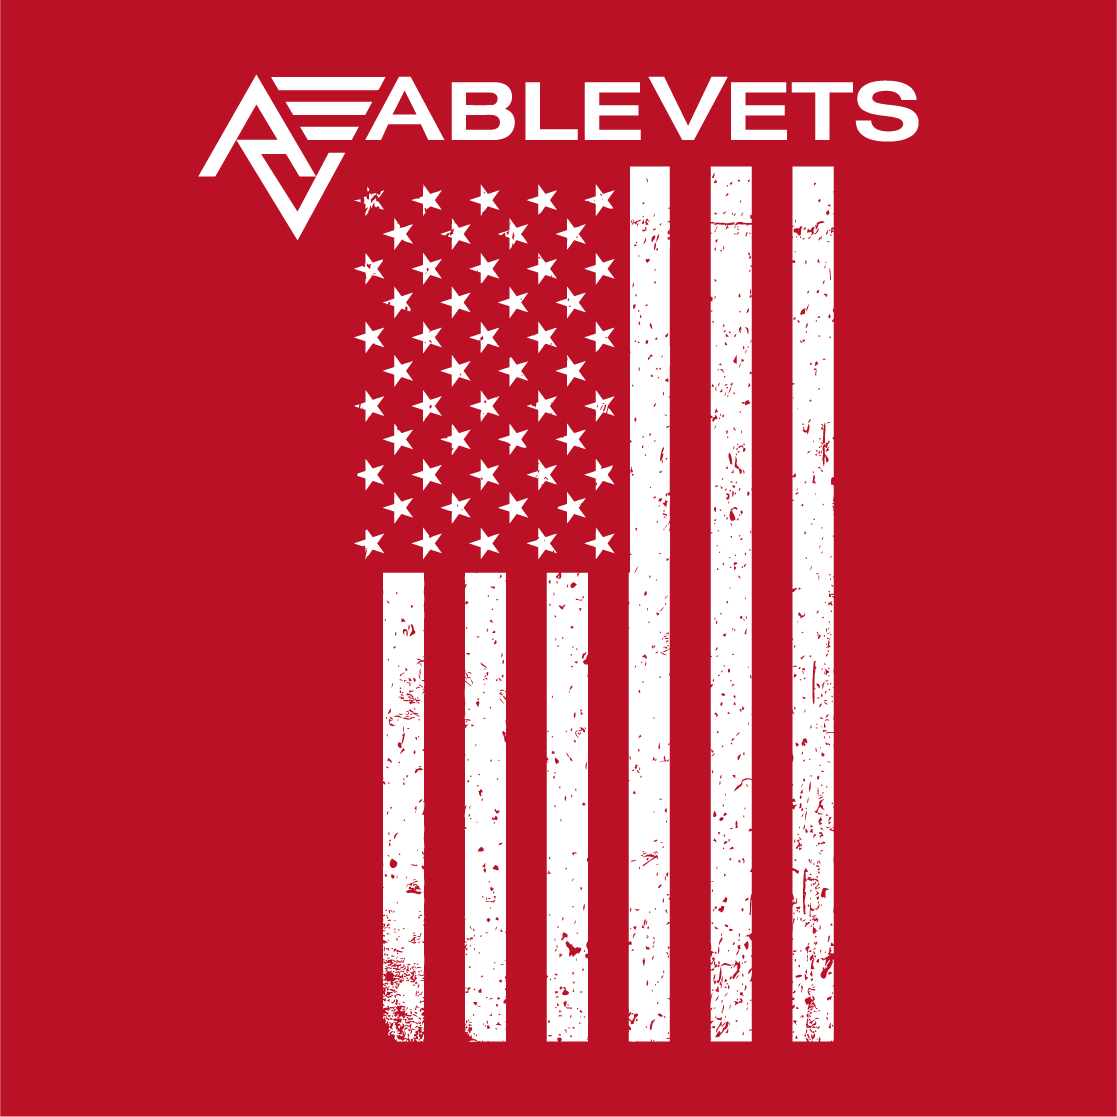 AbleVets RED Friday Shirts shirt design - zoomed